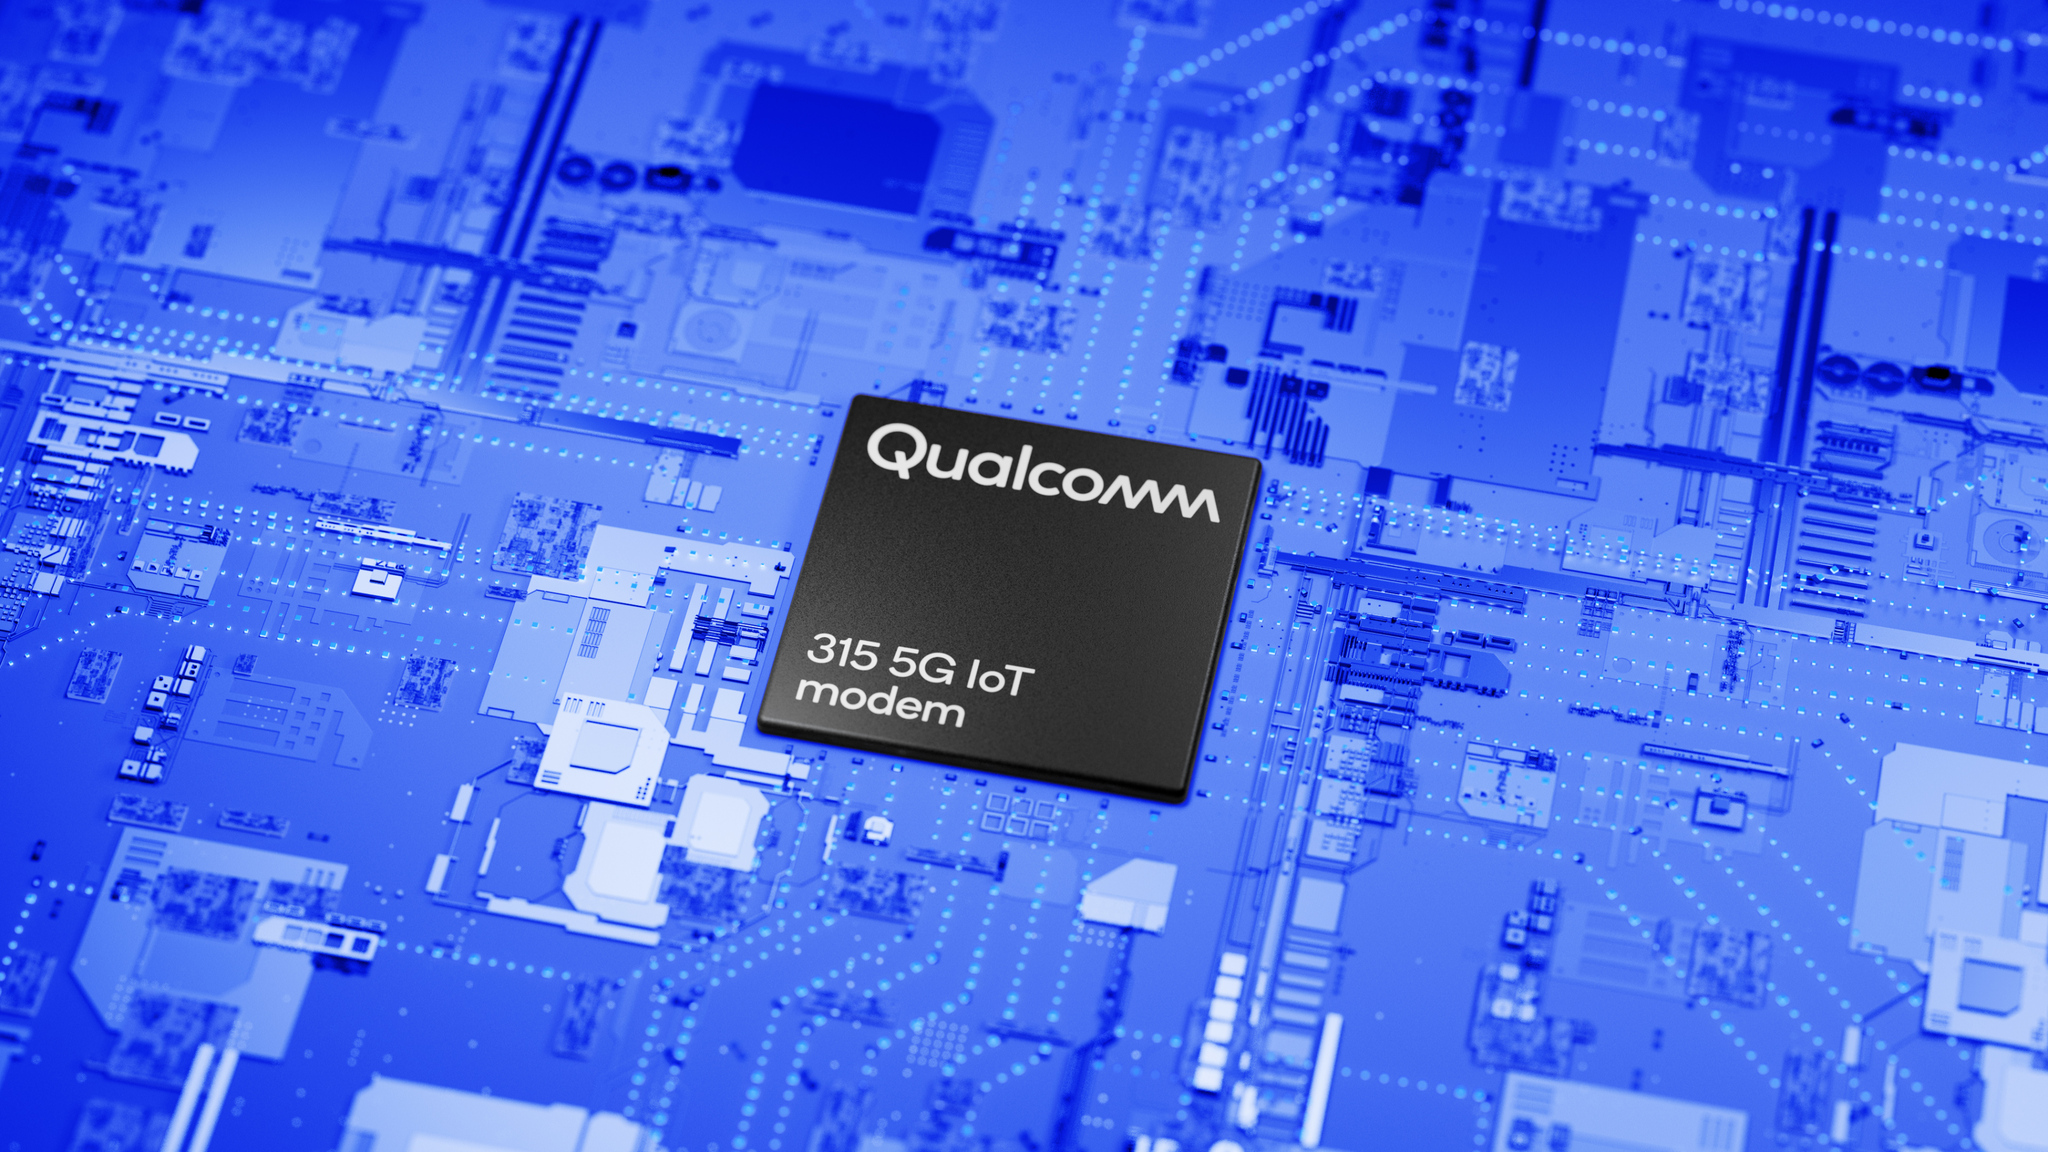 Qualcomm unveils its first purpose-built 5G modem for IoT